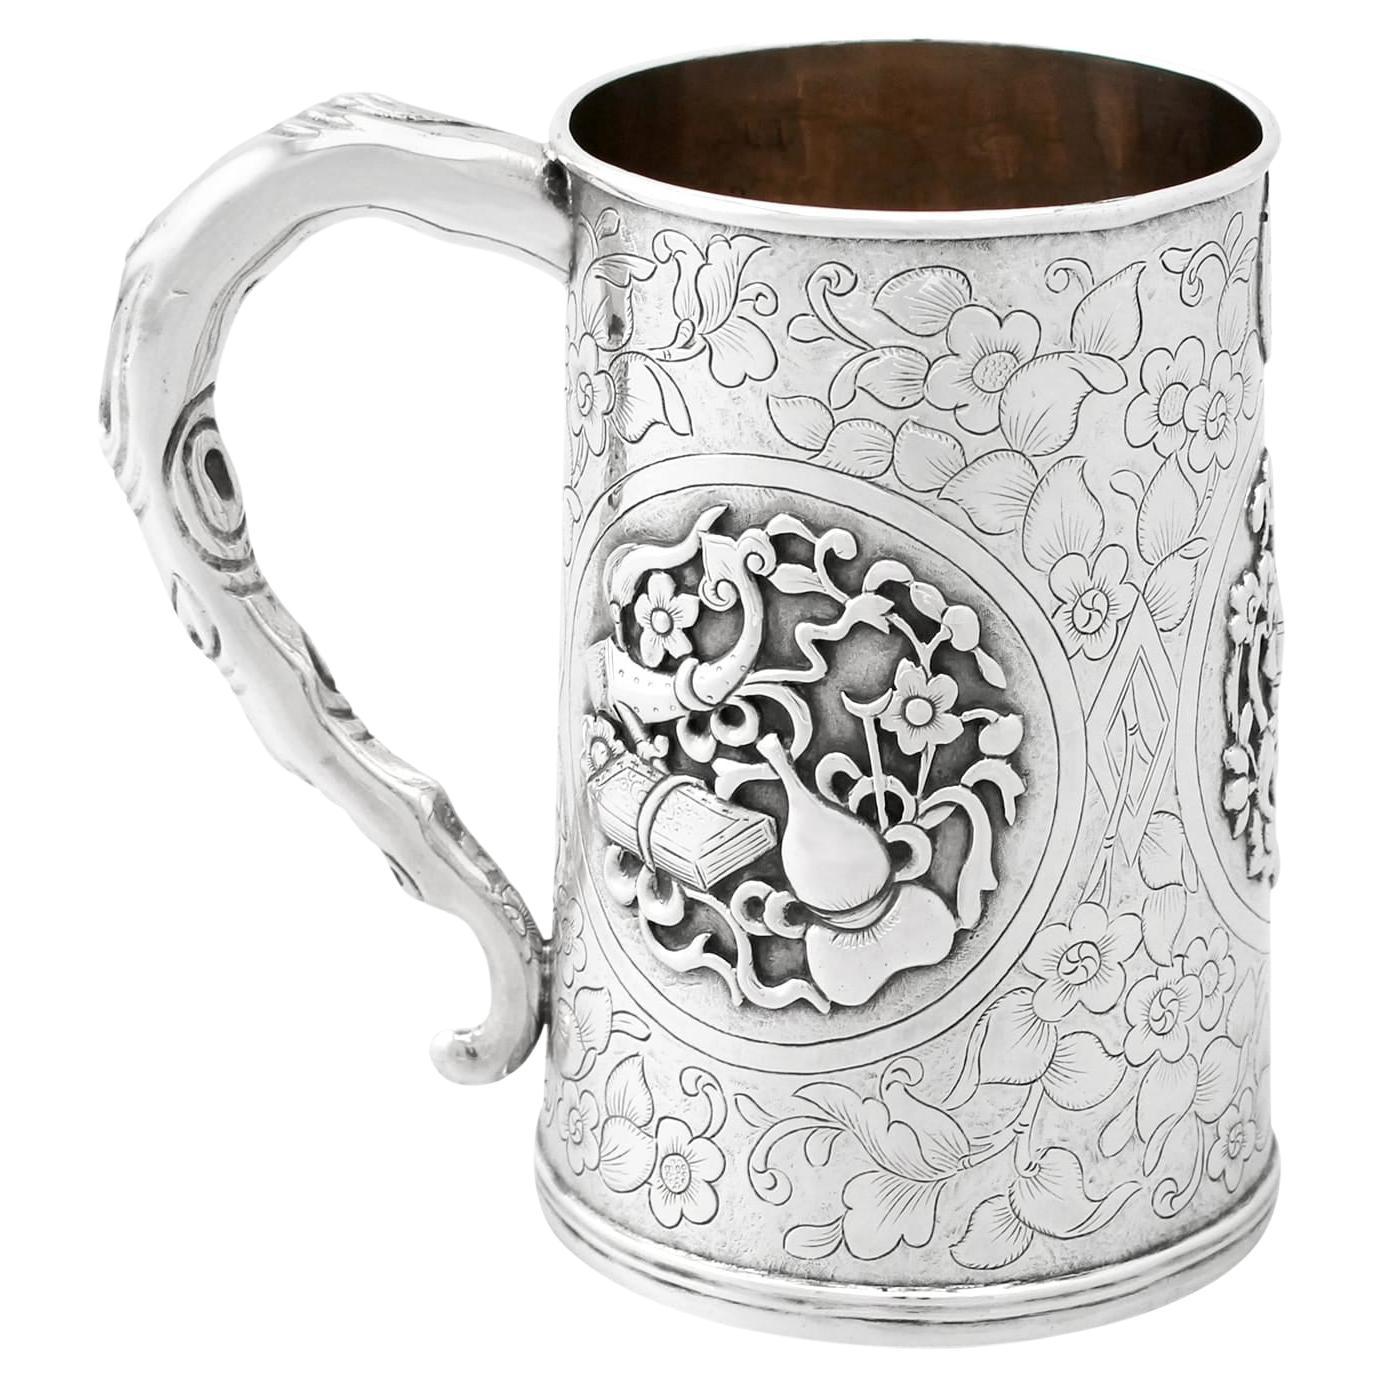 Antique 1850s Chinese Export Silver Mug